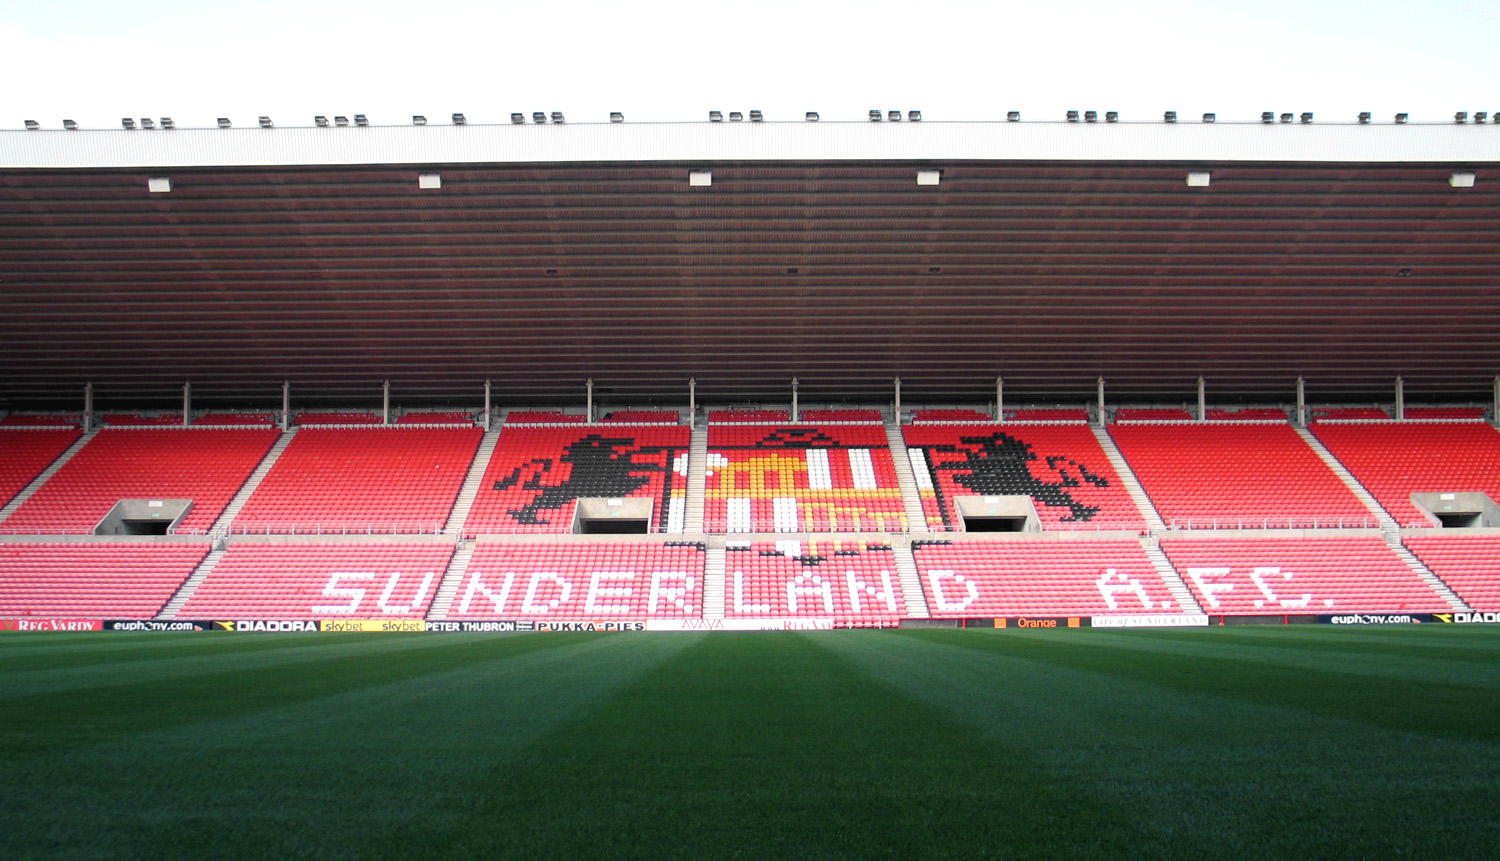 The Stadium of Light hosts this crucial encounter